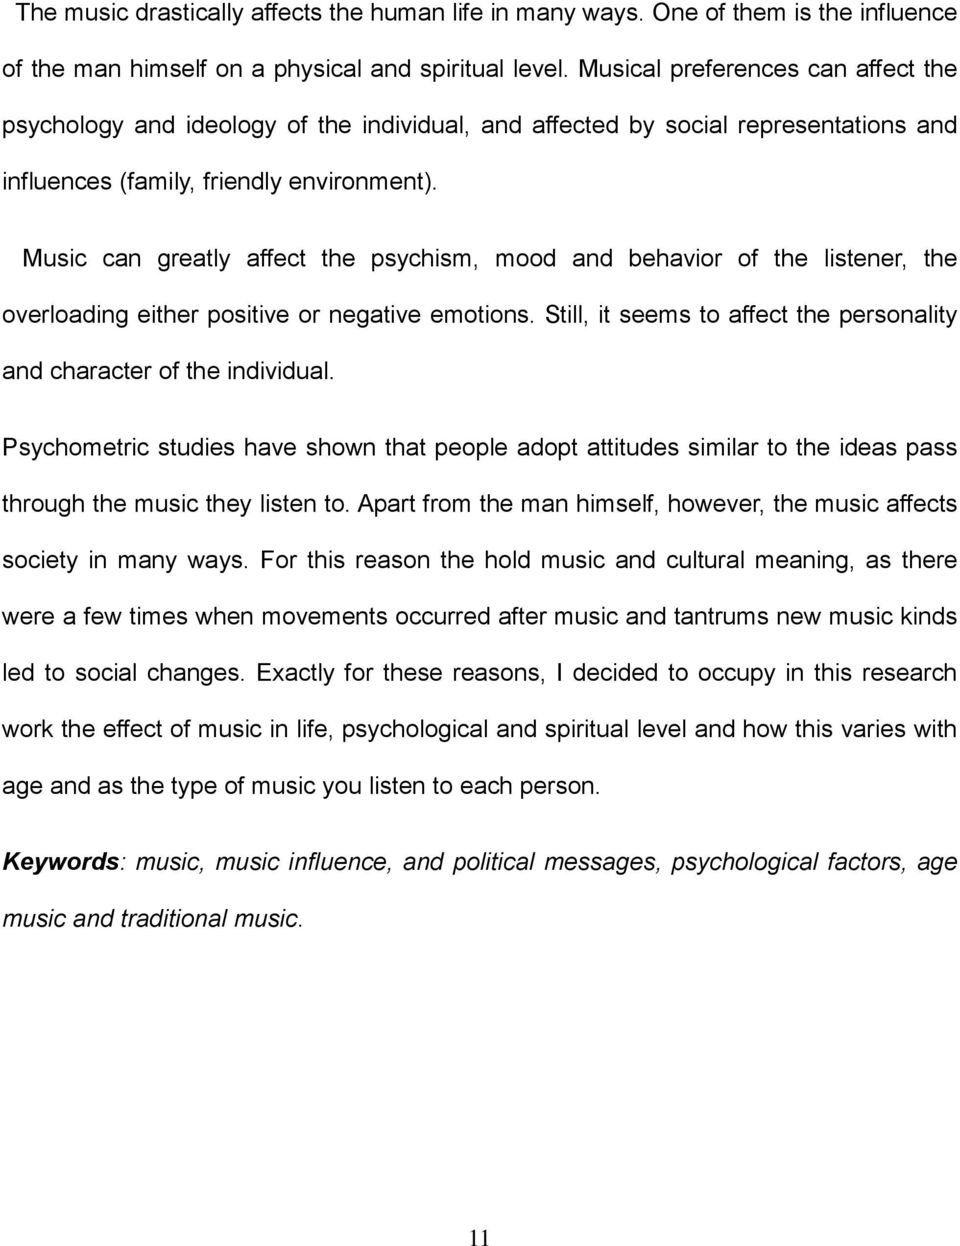 Music can greatly affect the psychism, mood and behavior of the listener, the overloading either positive or negative emotions.